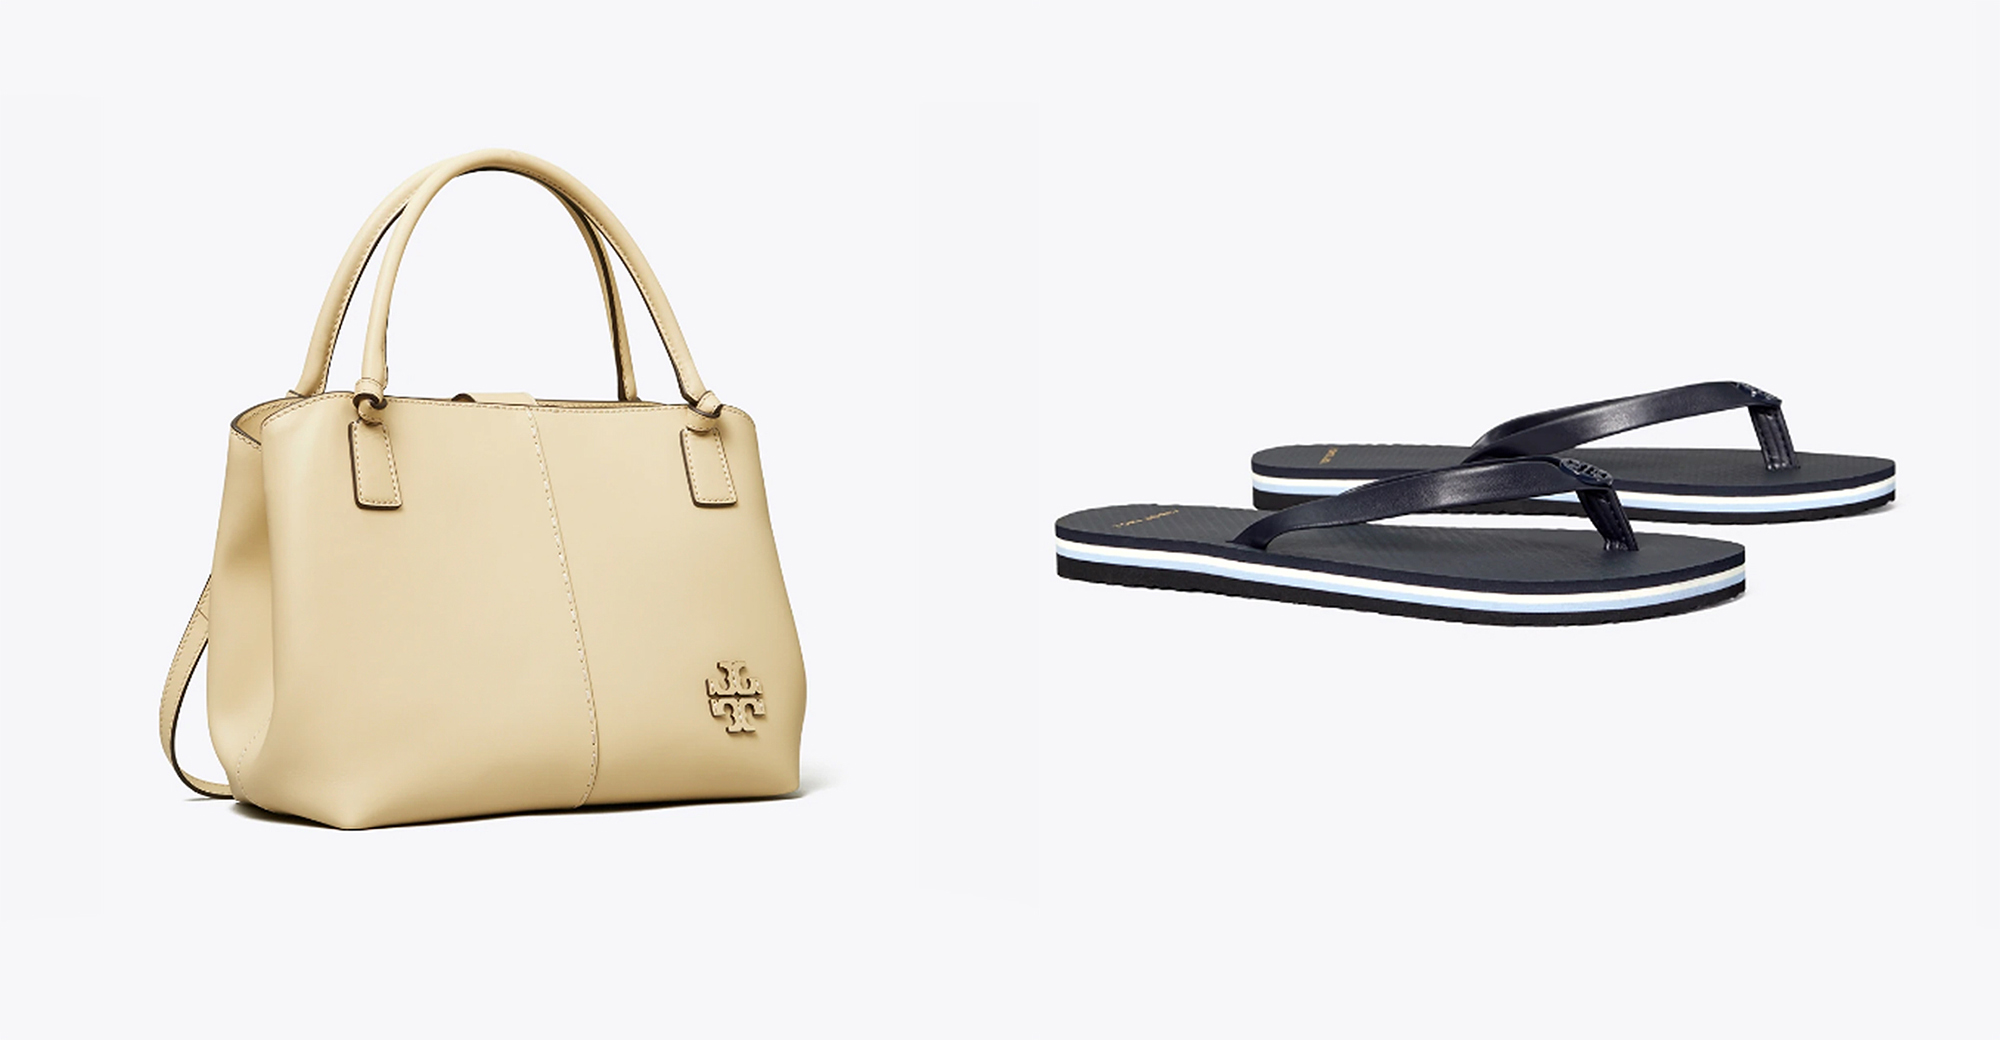 Tory Burch Has So Many Bags and Accessories on Sale